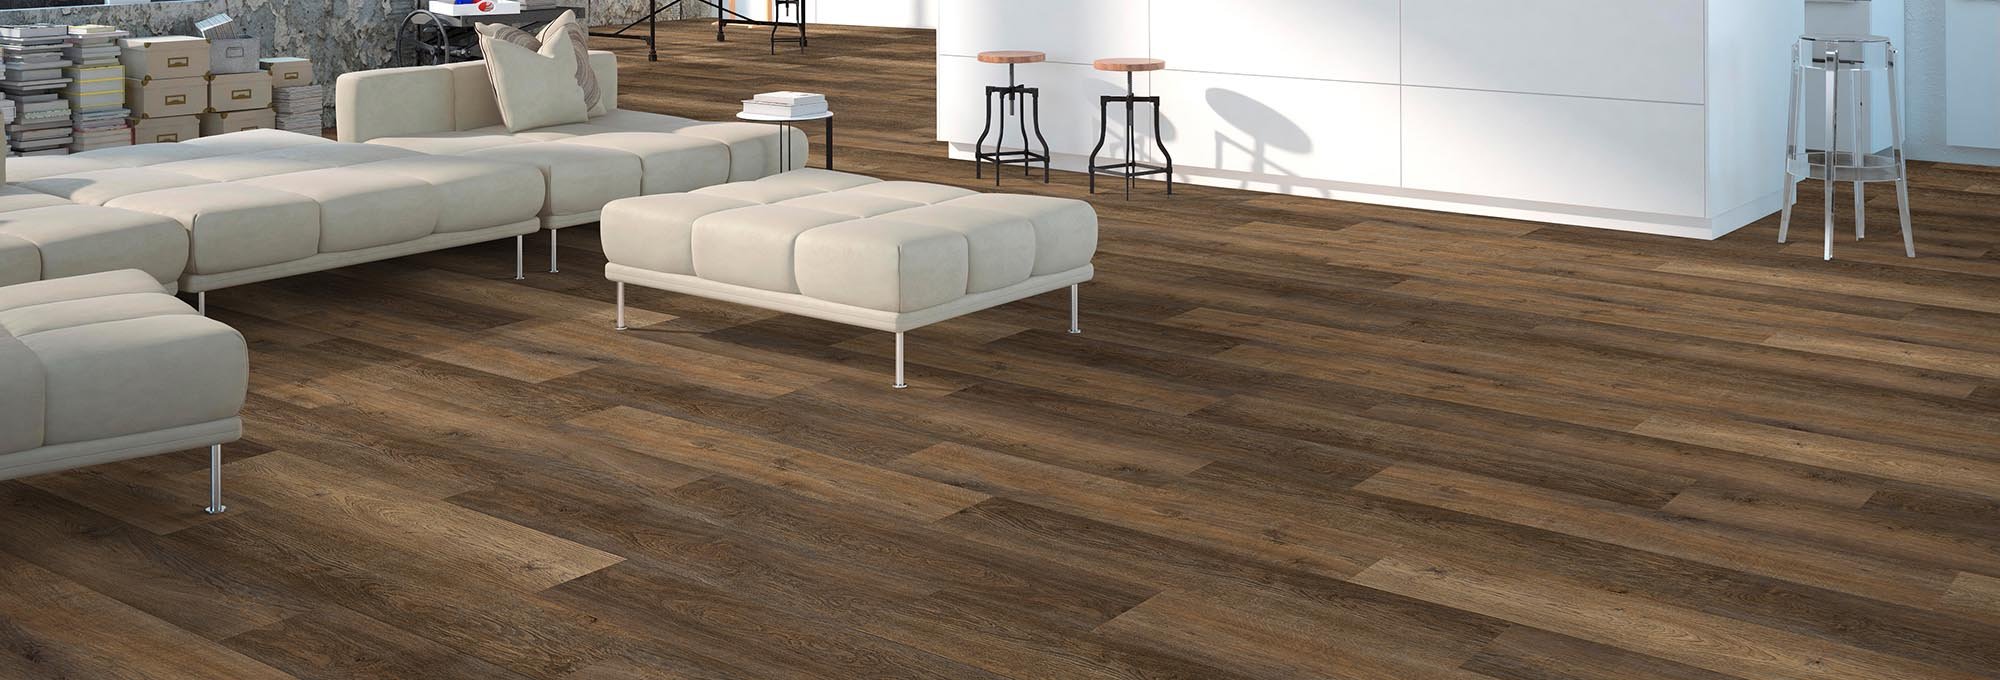 Shop Flooring Products from CarpetsPlus COLORTILE of Racine in Racine, WI